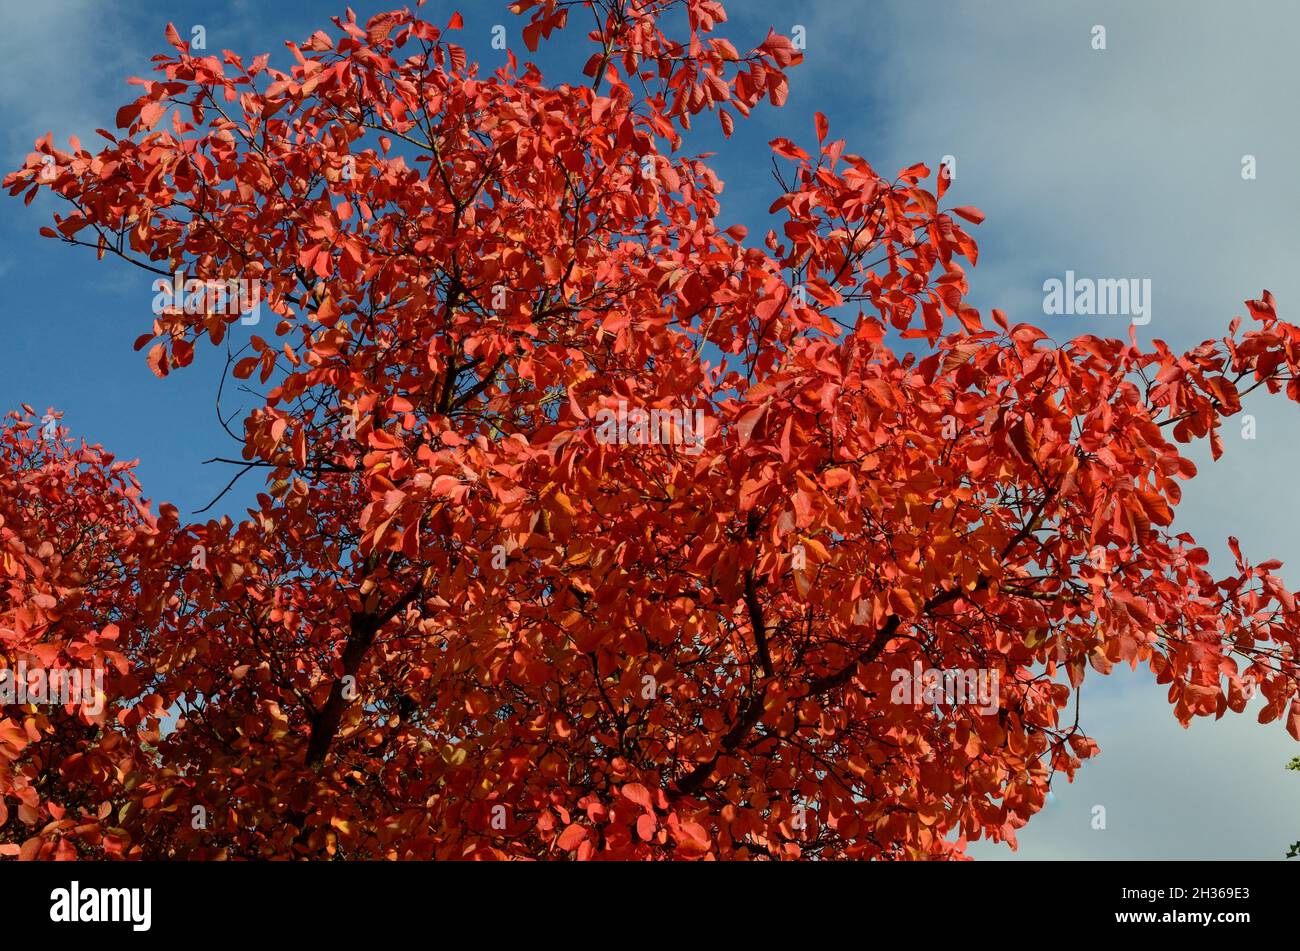 Brilliant red orange leaves of the Cotinus Flame tree Smoke tree in autumn against a blue sky Stock Photo